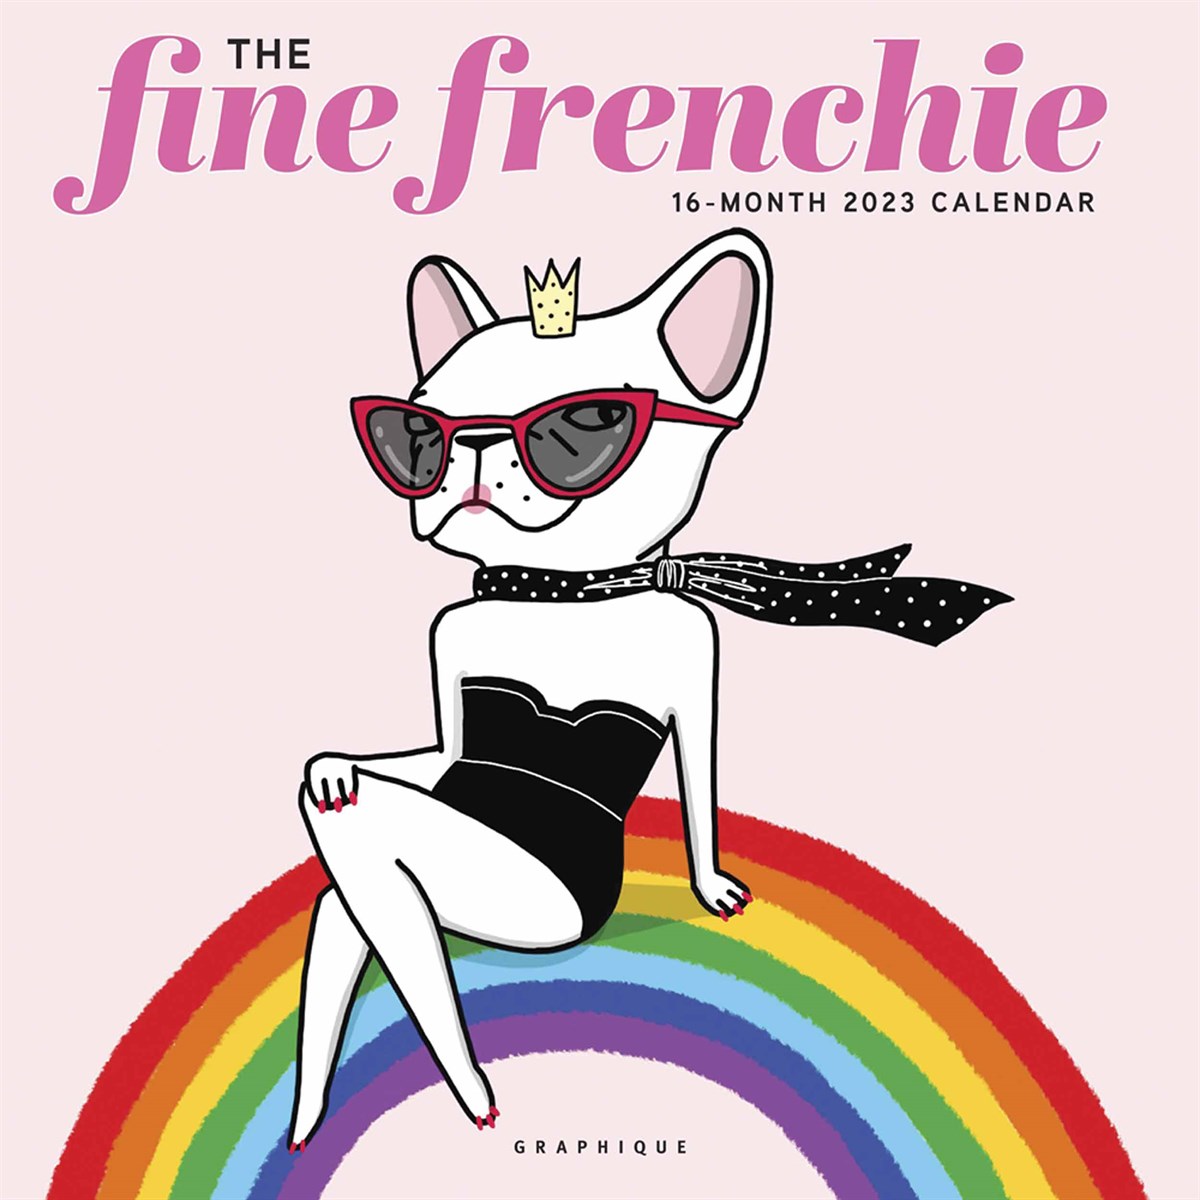 The Fine Frenchie 2023 Calendars